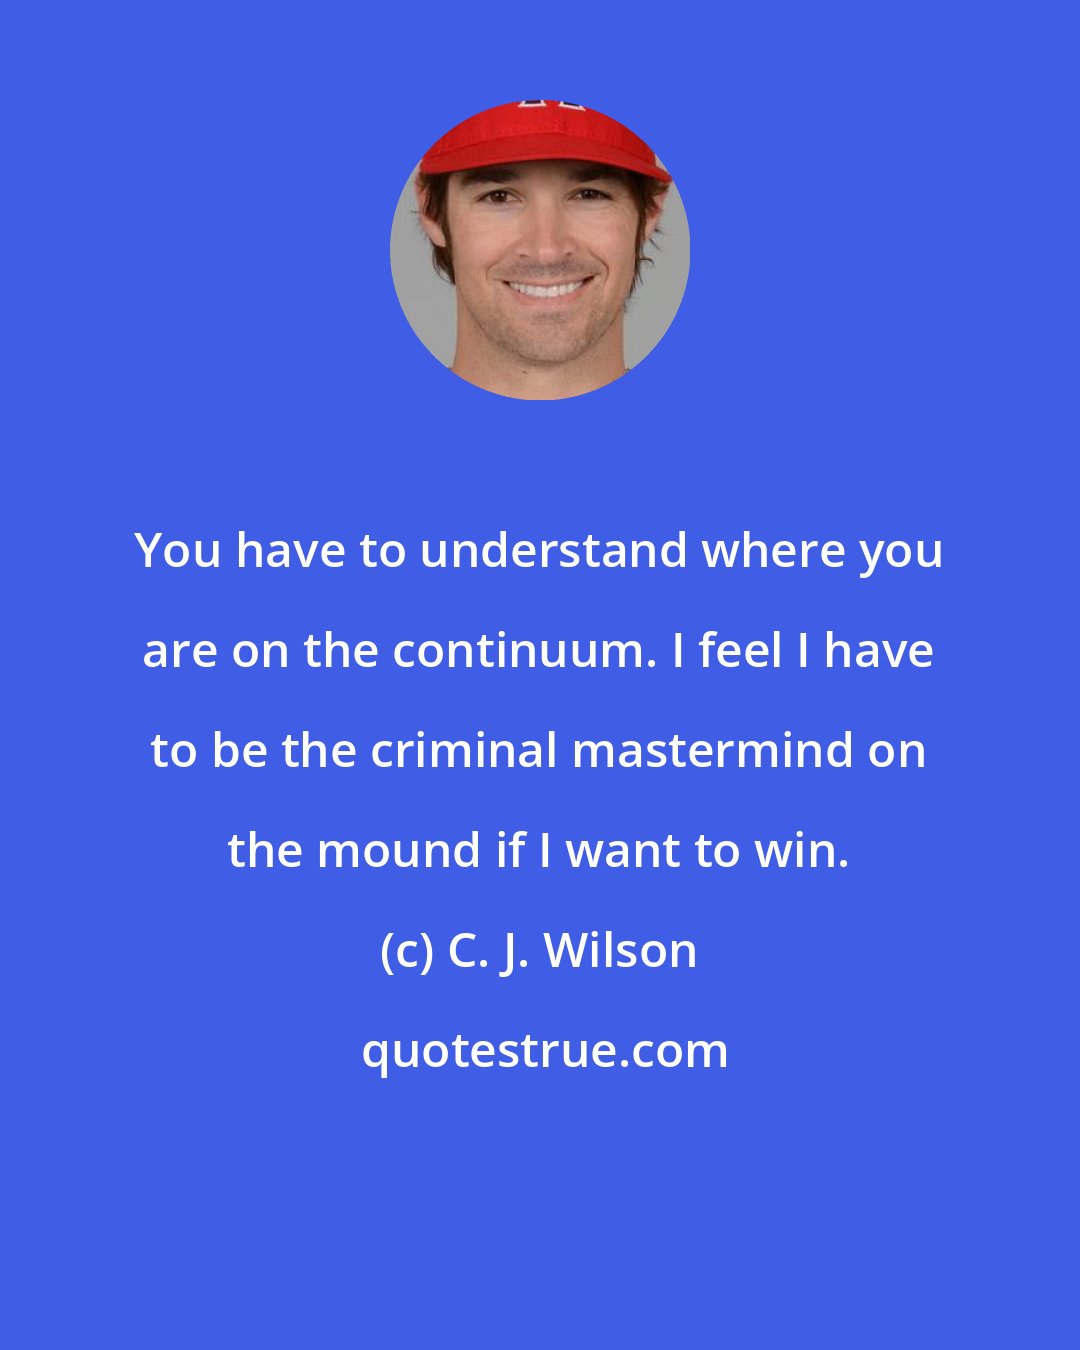 C. J. Wilson: You have to understand where you are on the continuum. I feel I have to be the criminal mastermind on the mound if I want to win.